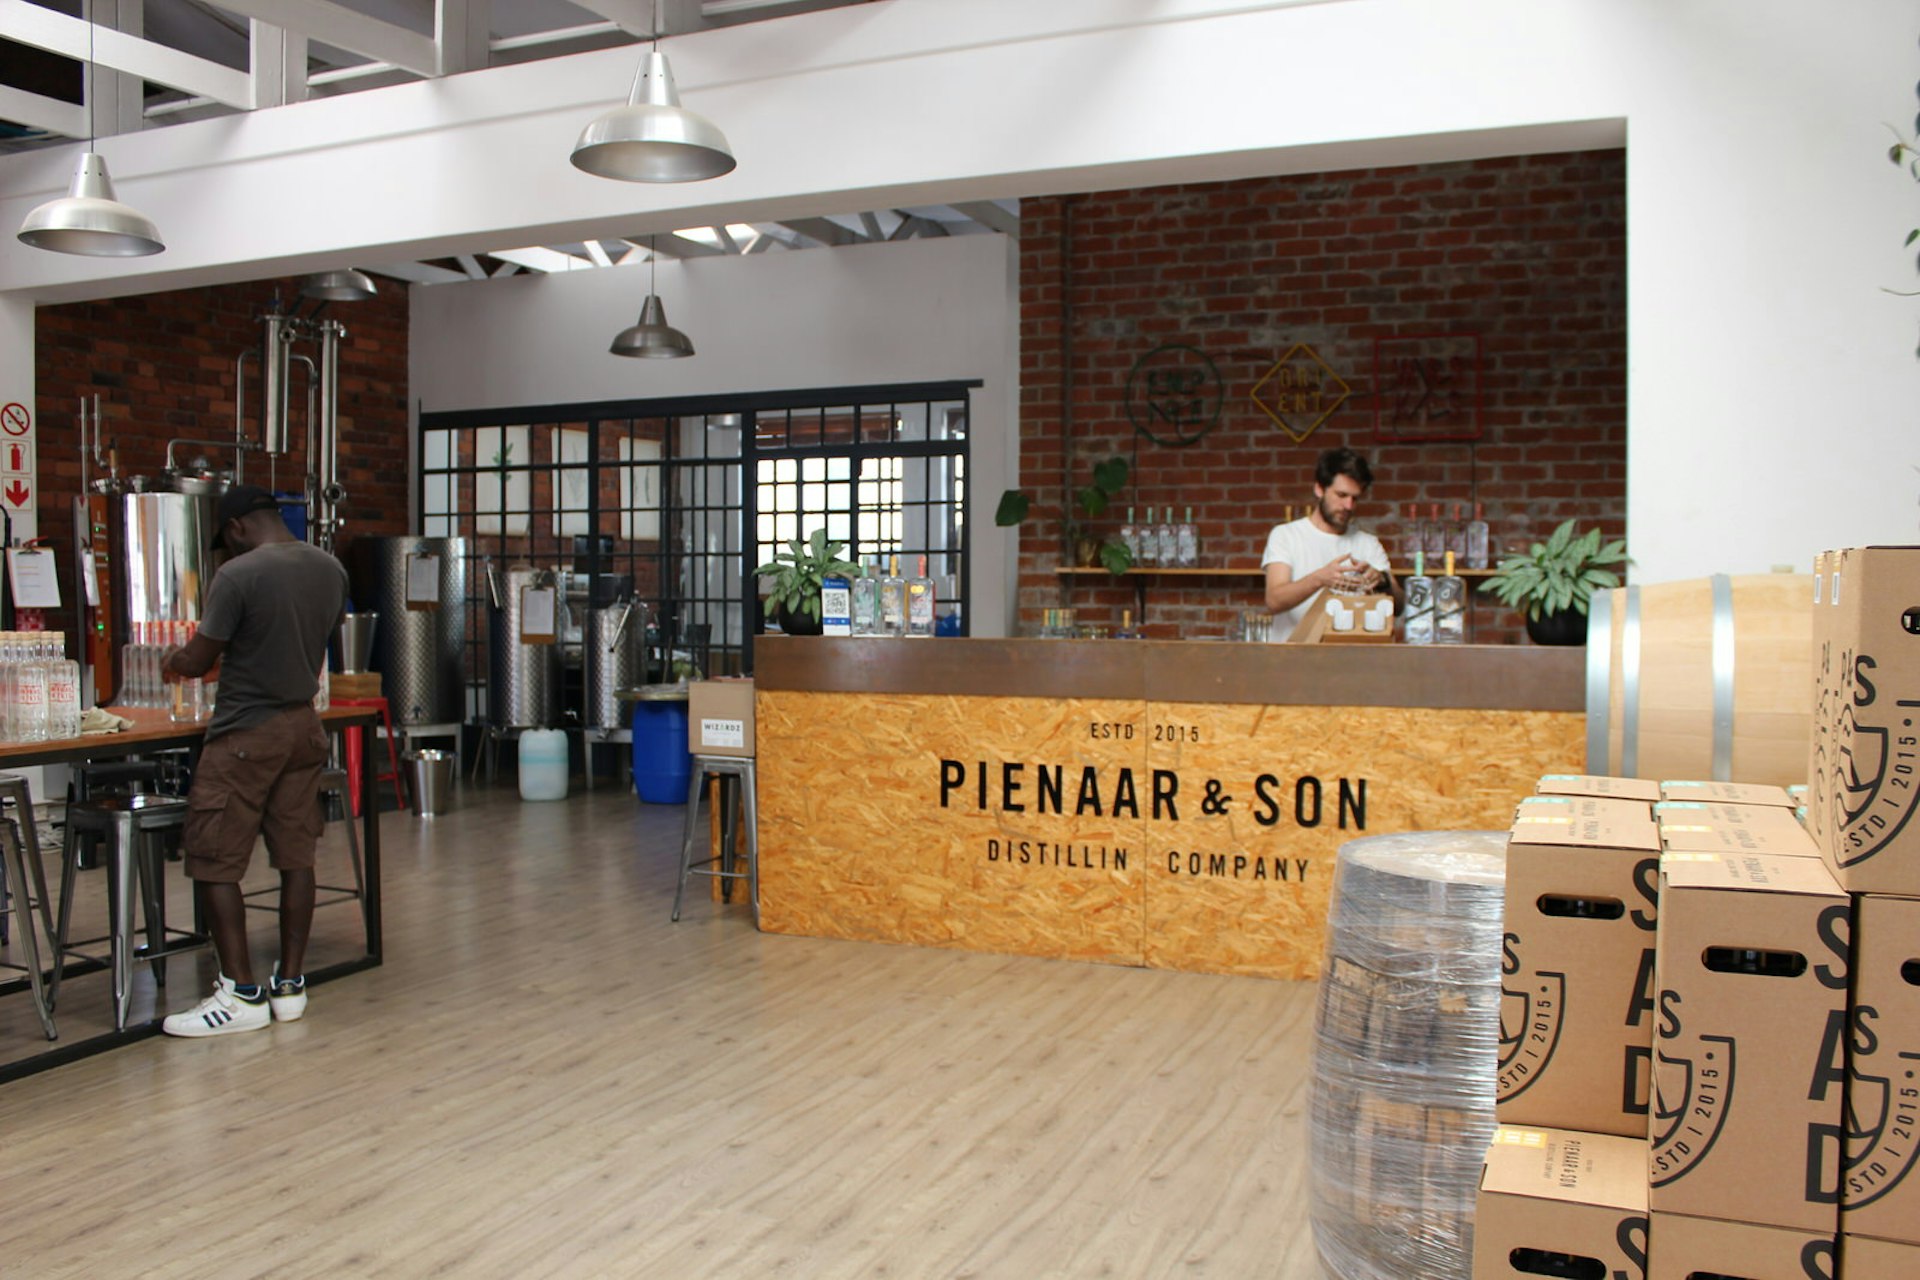 Cape Town gin - Part warehouse, part bar, the interior of Pienaar & Sons is a mix of wooden floors, chipboard furniture, brick walls, loft-like crittall windows and small-scale distillery equipment